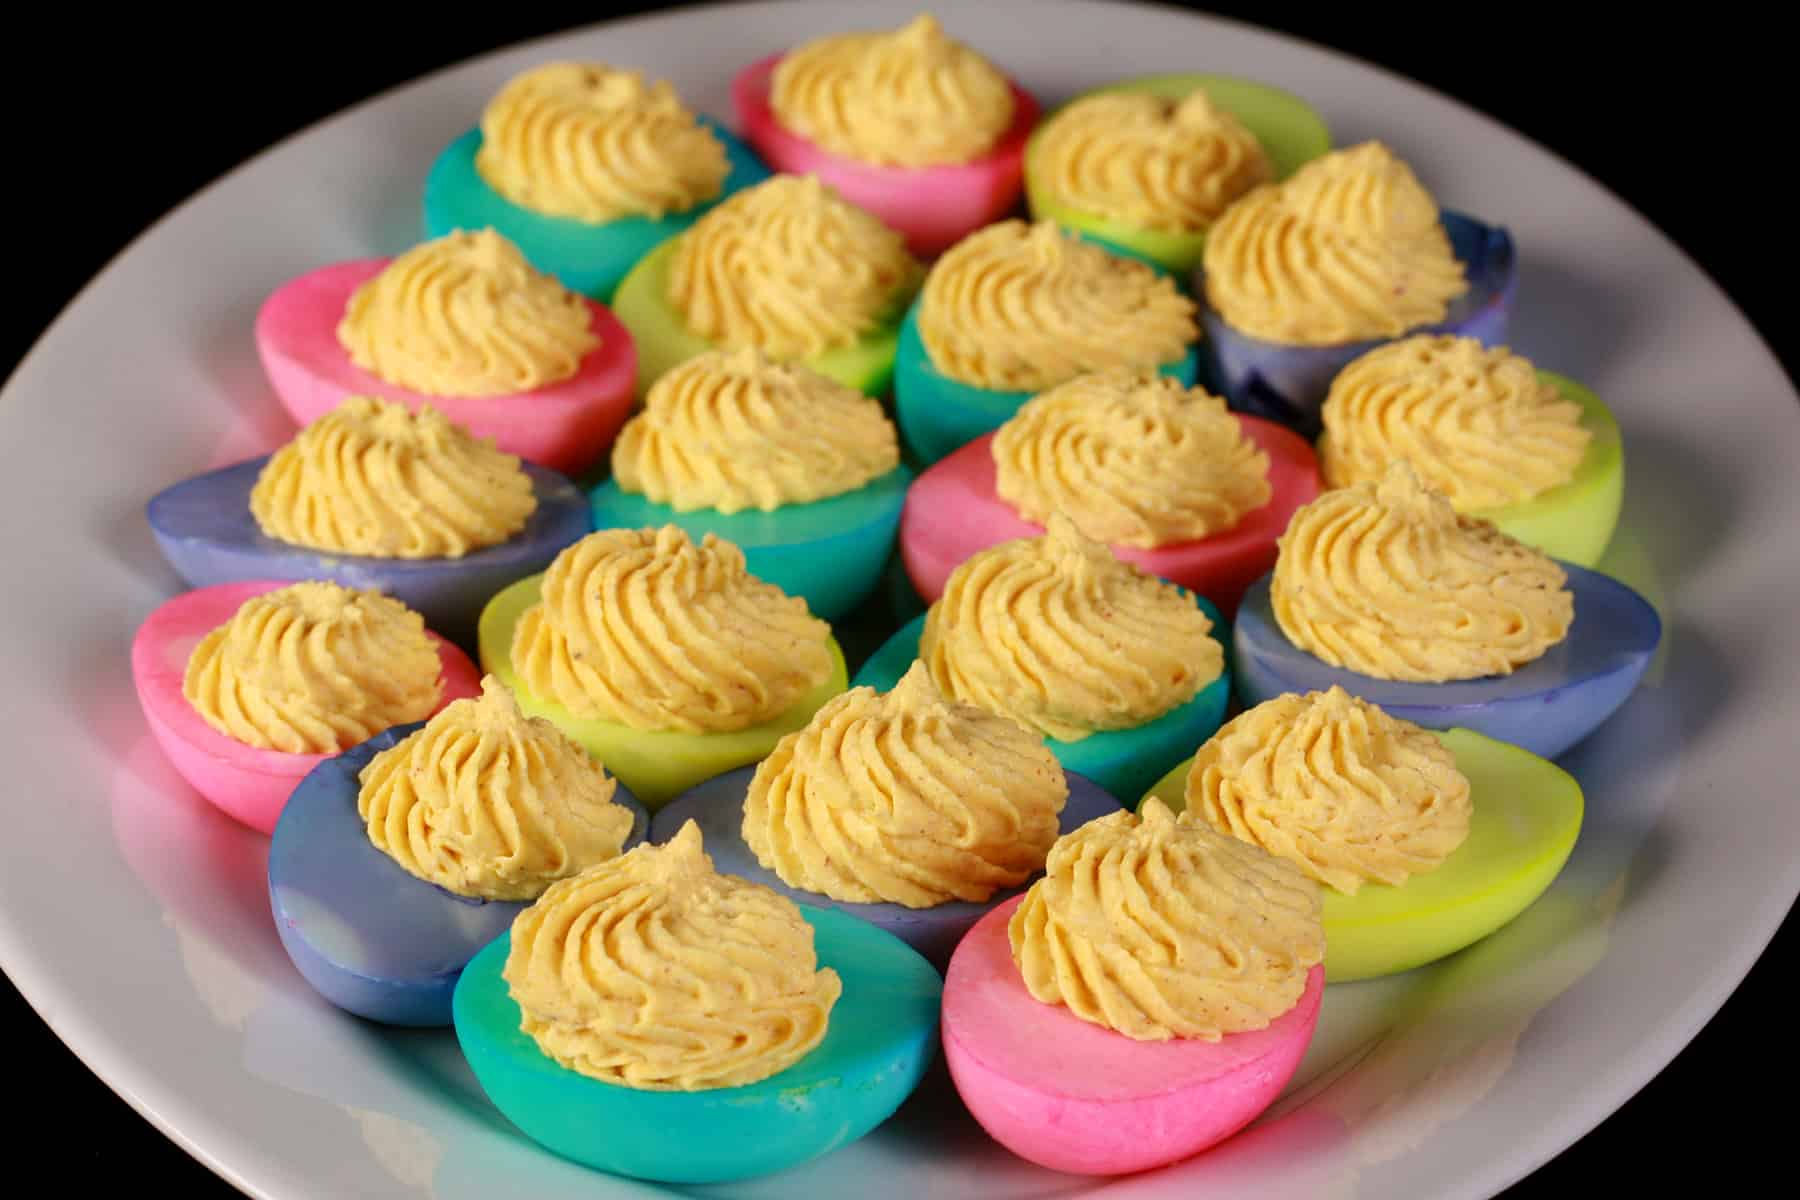 A serving plate of colored deviled eggs, where the whites have been dyed hot pink, lime green, turquoise, and light purple.